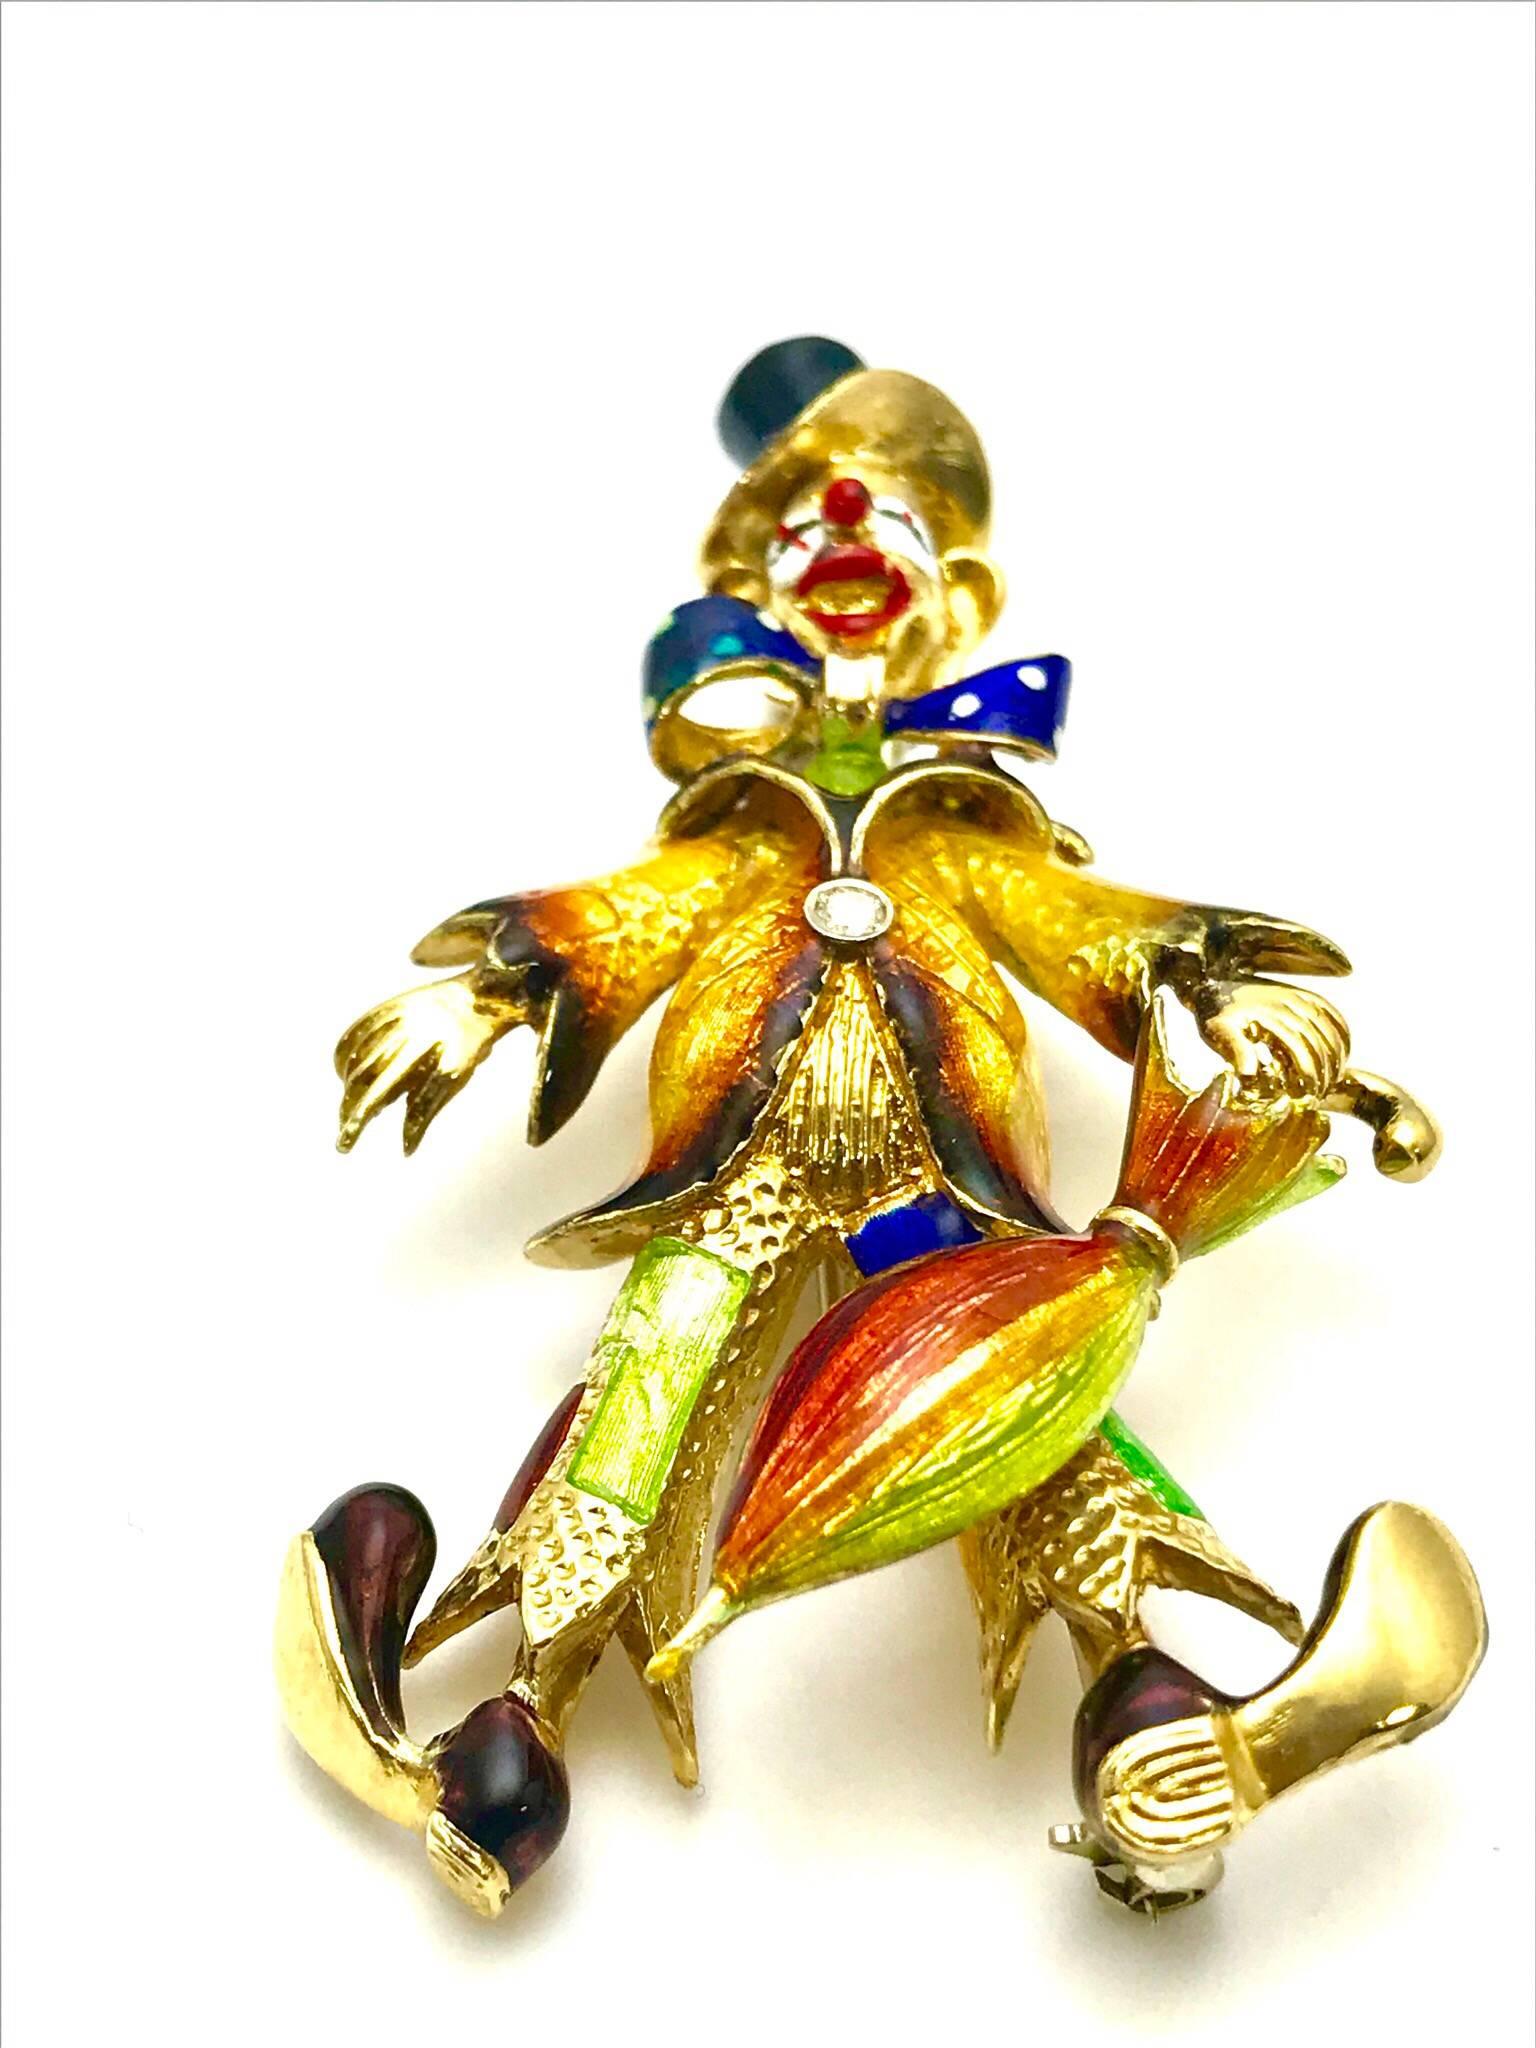 A Spritzer & Fuhrman diamond and enameled 18 karat yellow gold clown brooch.  Standing on the heels of it's clown shoes, with it's toes out, and holding an umbrella, the clown is wearing a top hat, bow tie, coat and clown pants., all enameled with